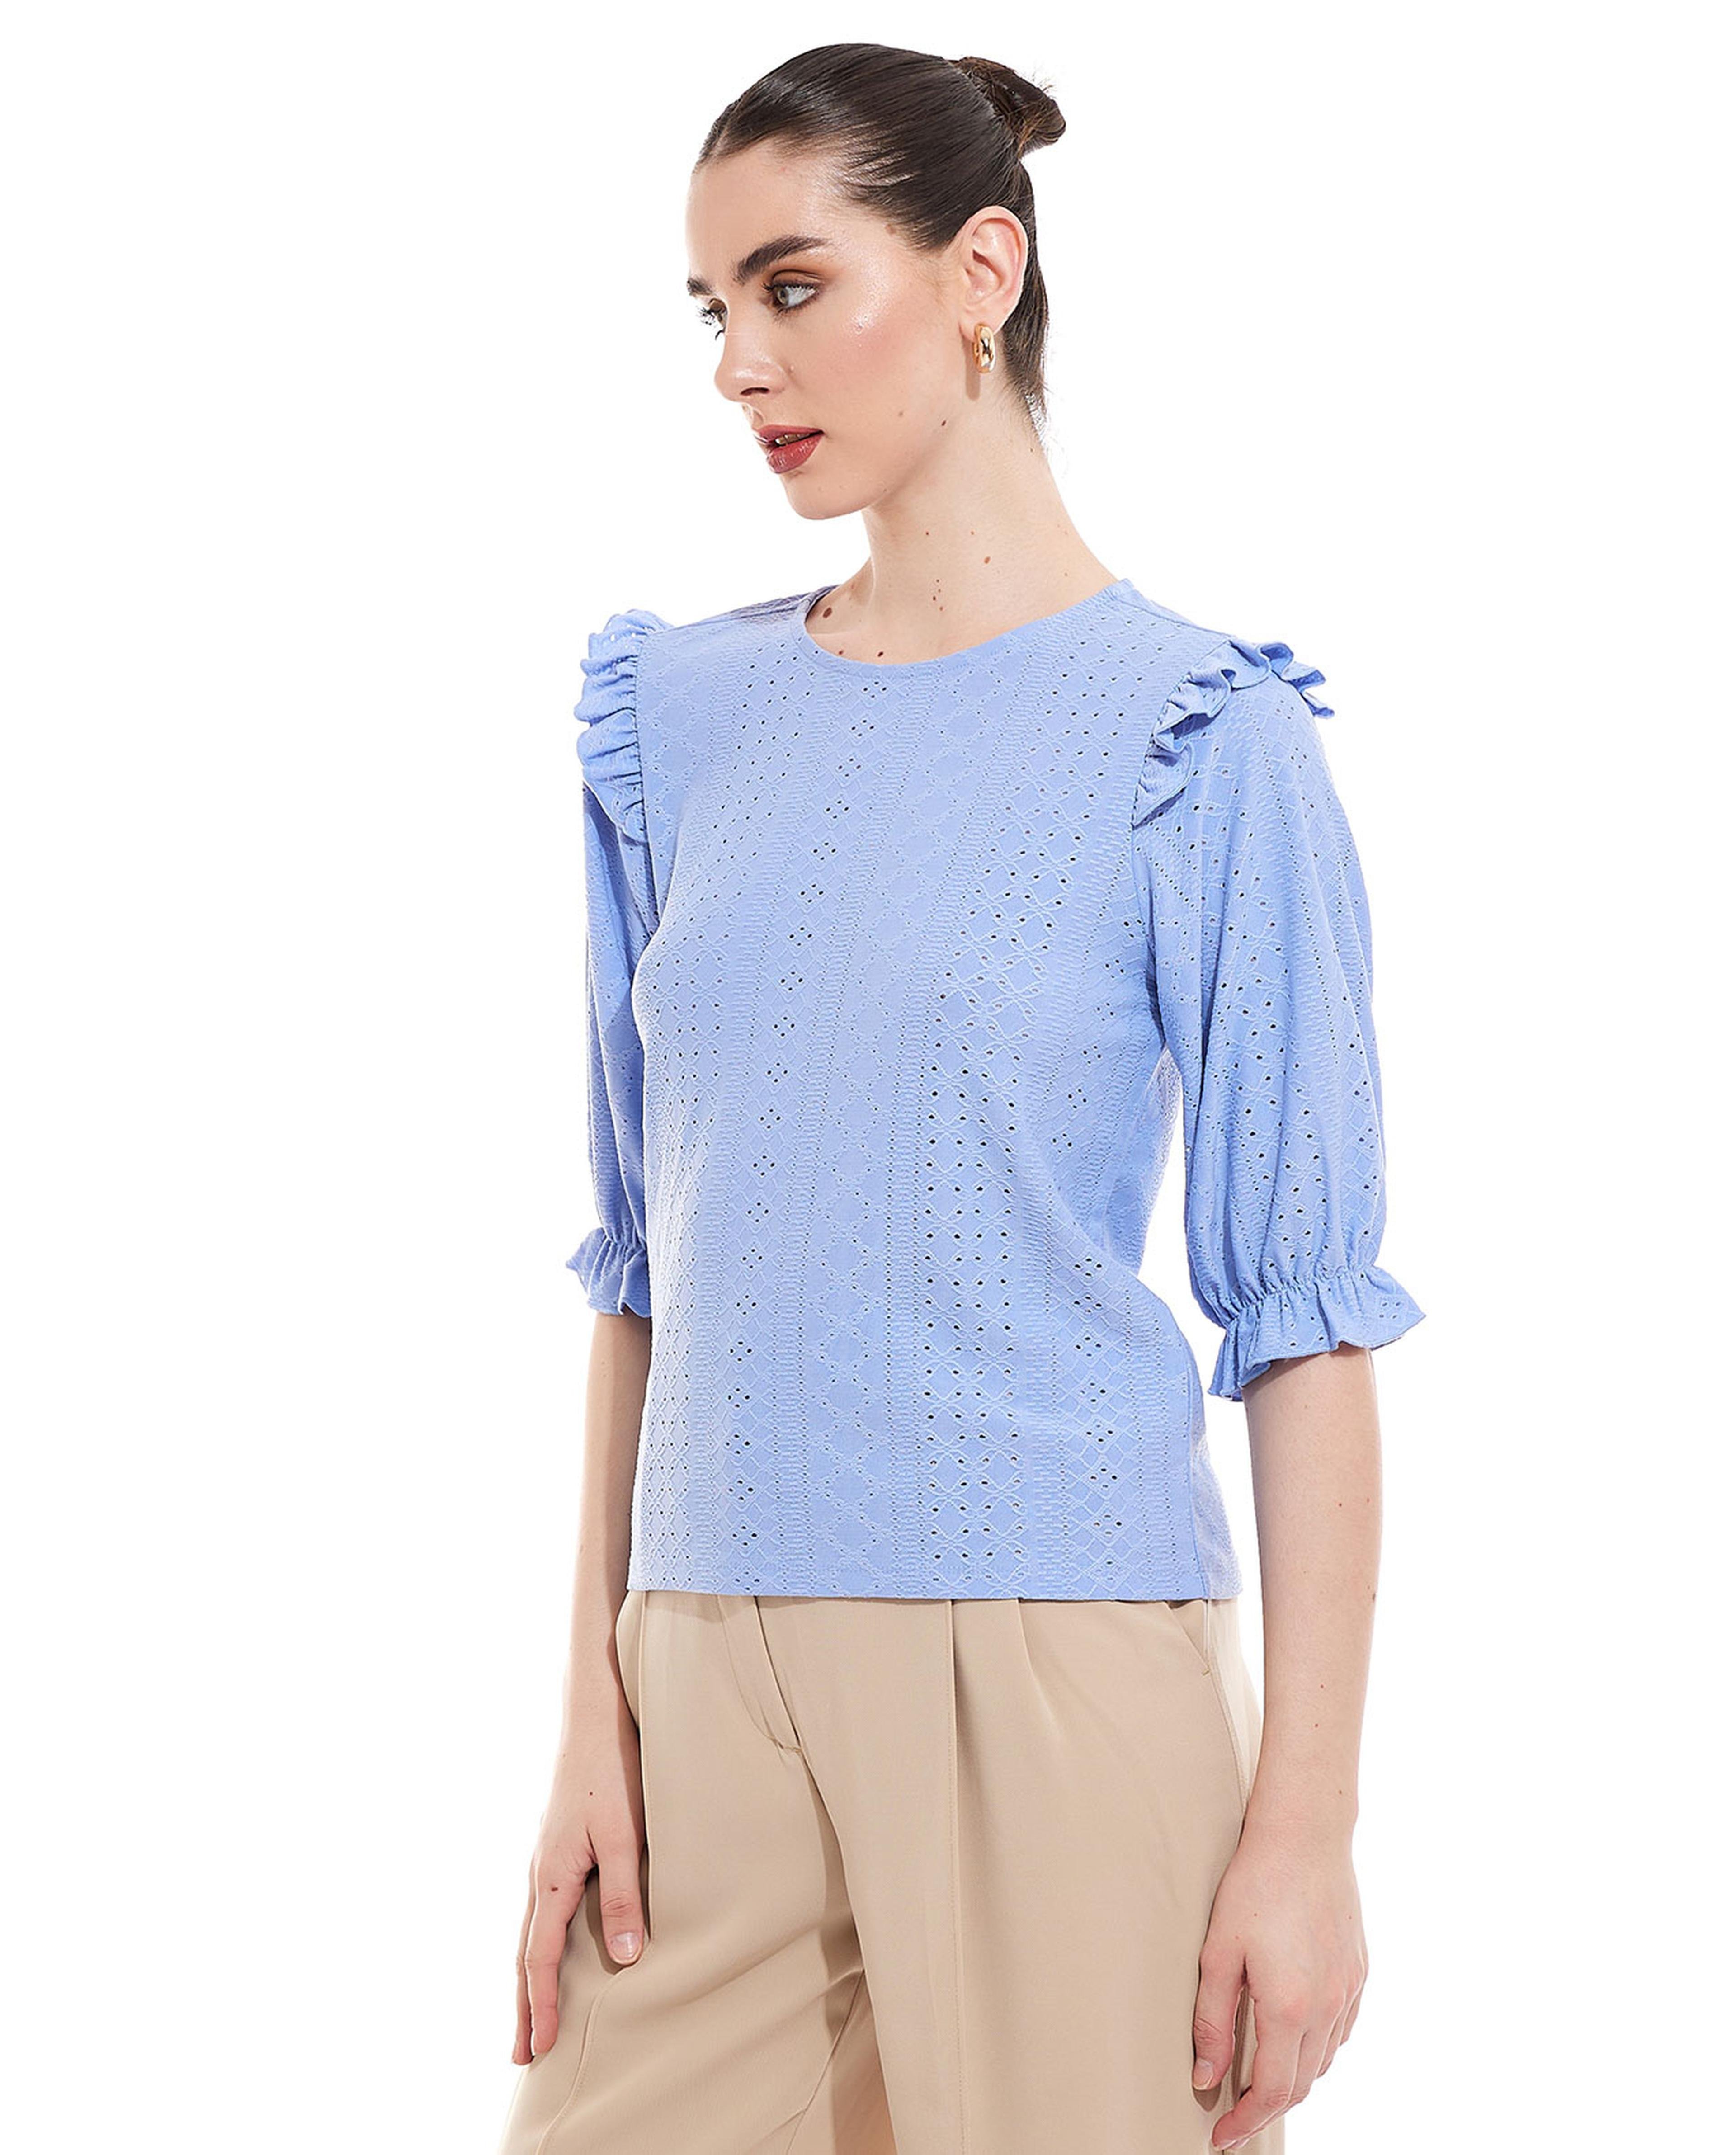 Schiffli Top with Crew Neck and Short Sleeves